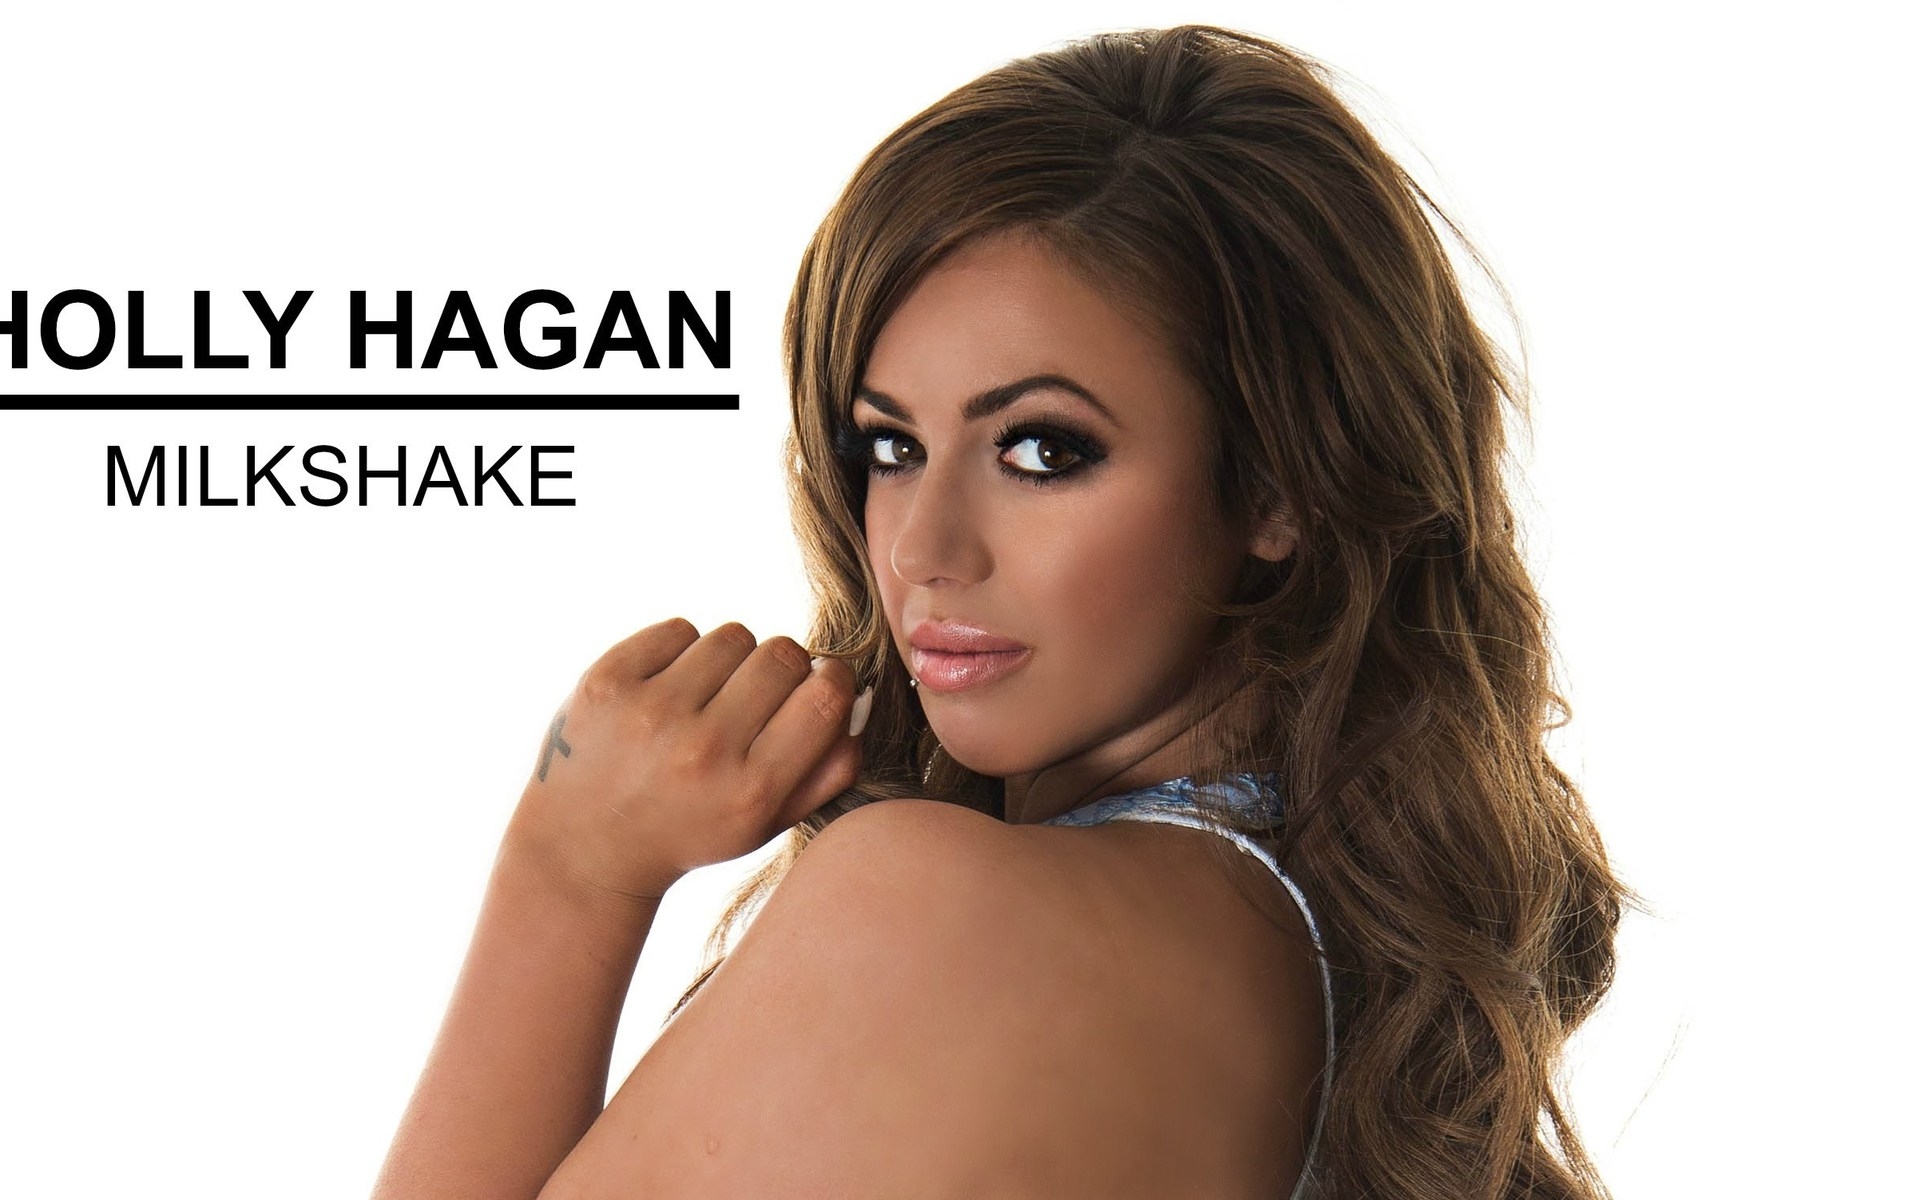 Holly Hagan Look for 1920 x 1200 widescreen resolution